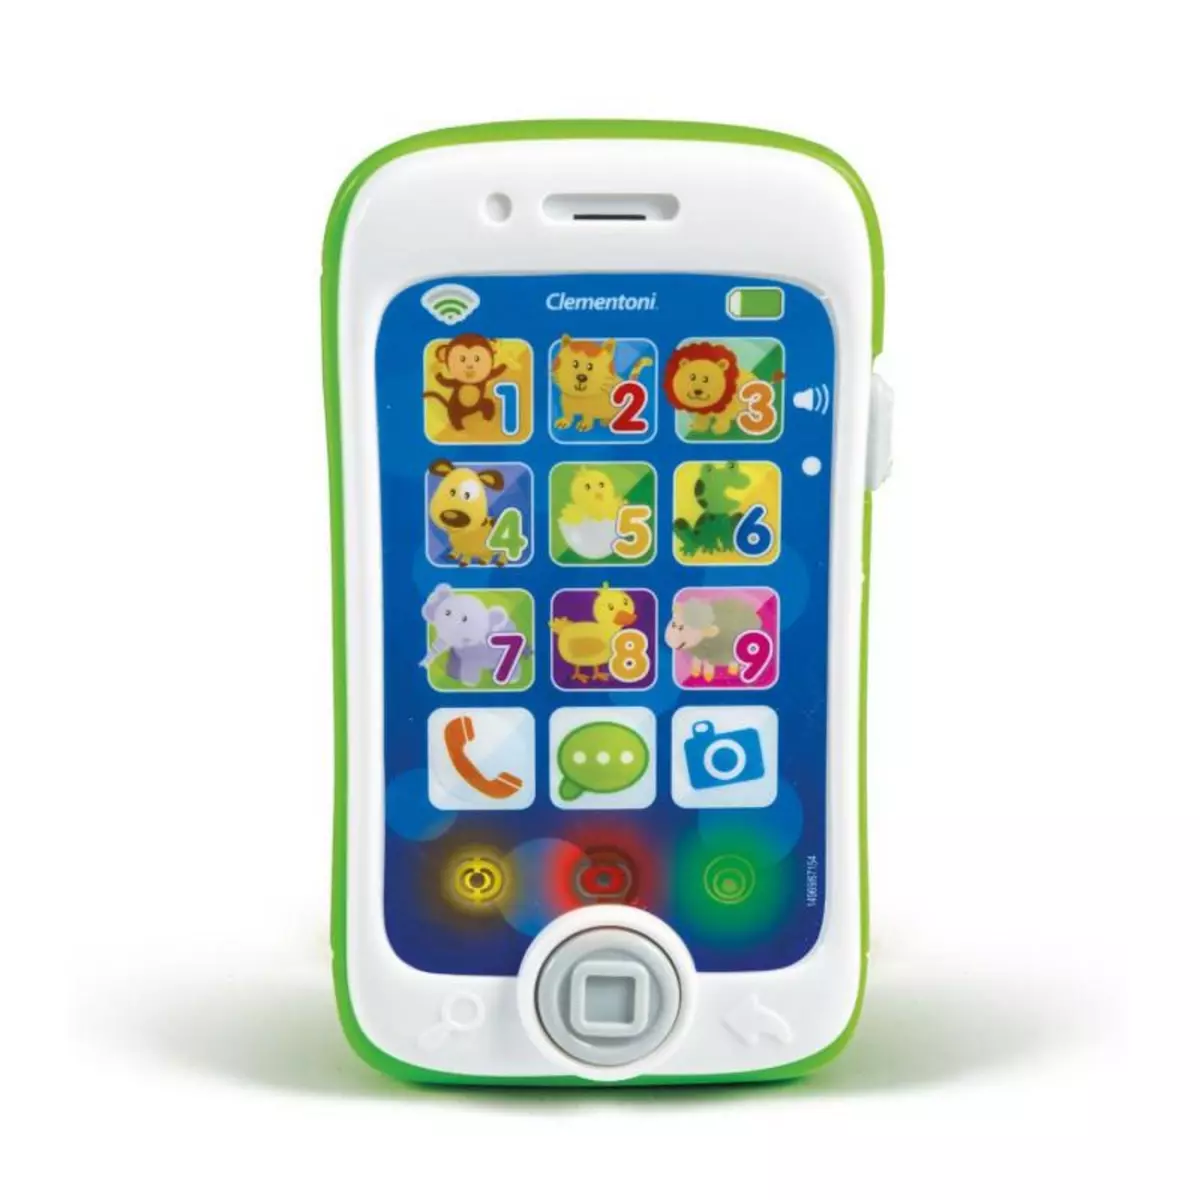 CLEMENTONI Clementoni Smartphone Touch & Play